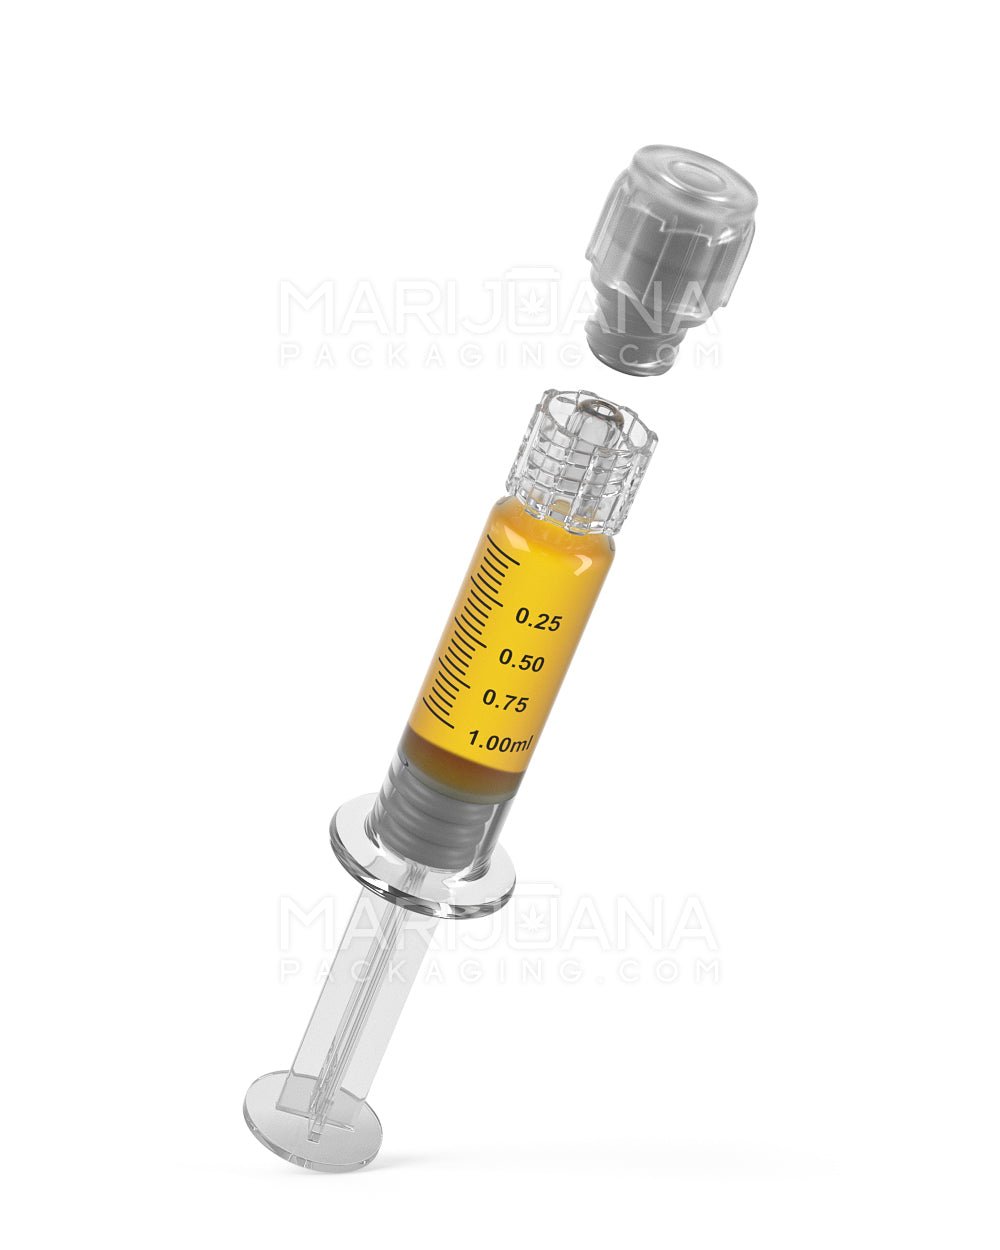 Child Resistant & Luer Lock | Glass Dab Applicator Syringes | 1mL - 0.25mL Increments - 100 Count - 6